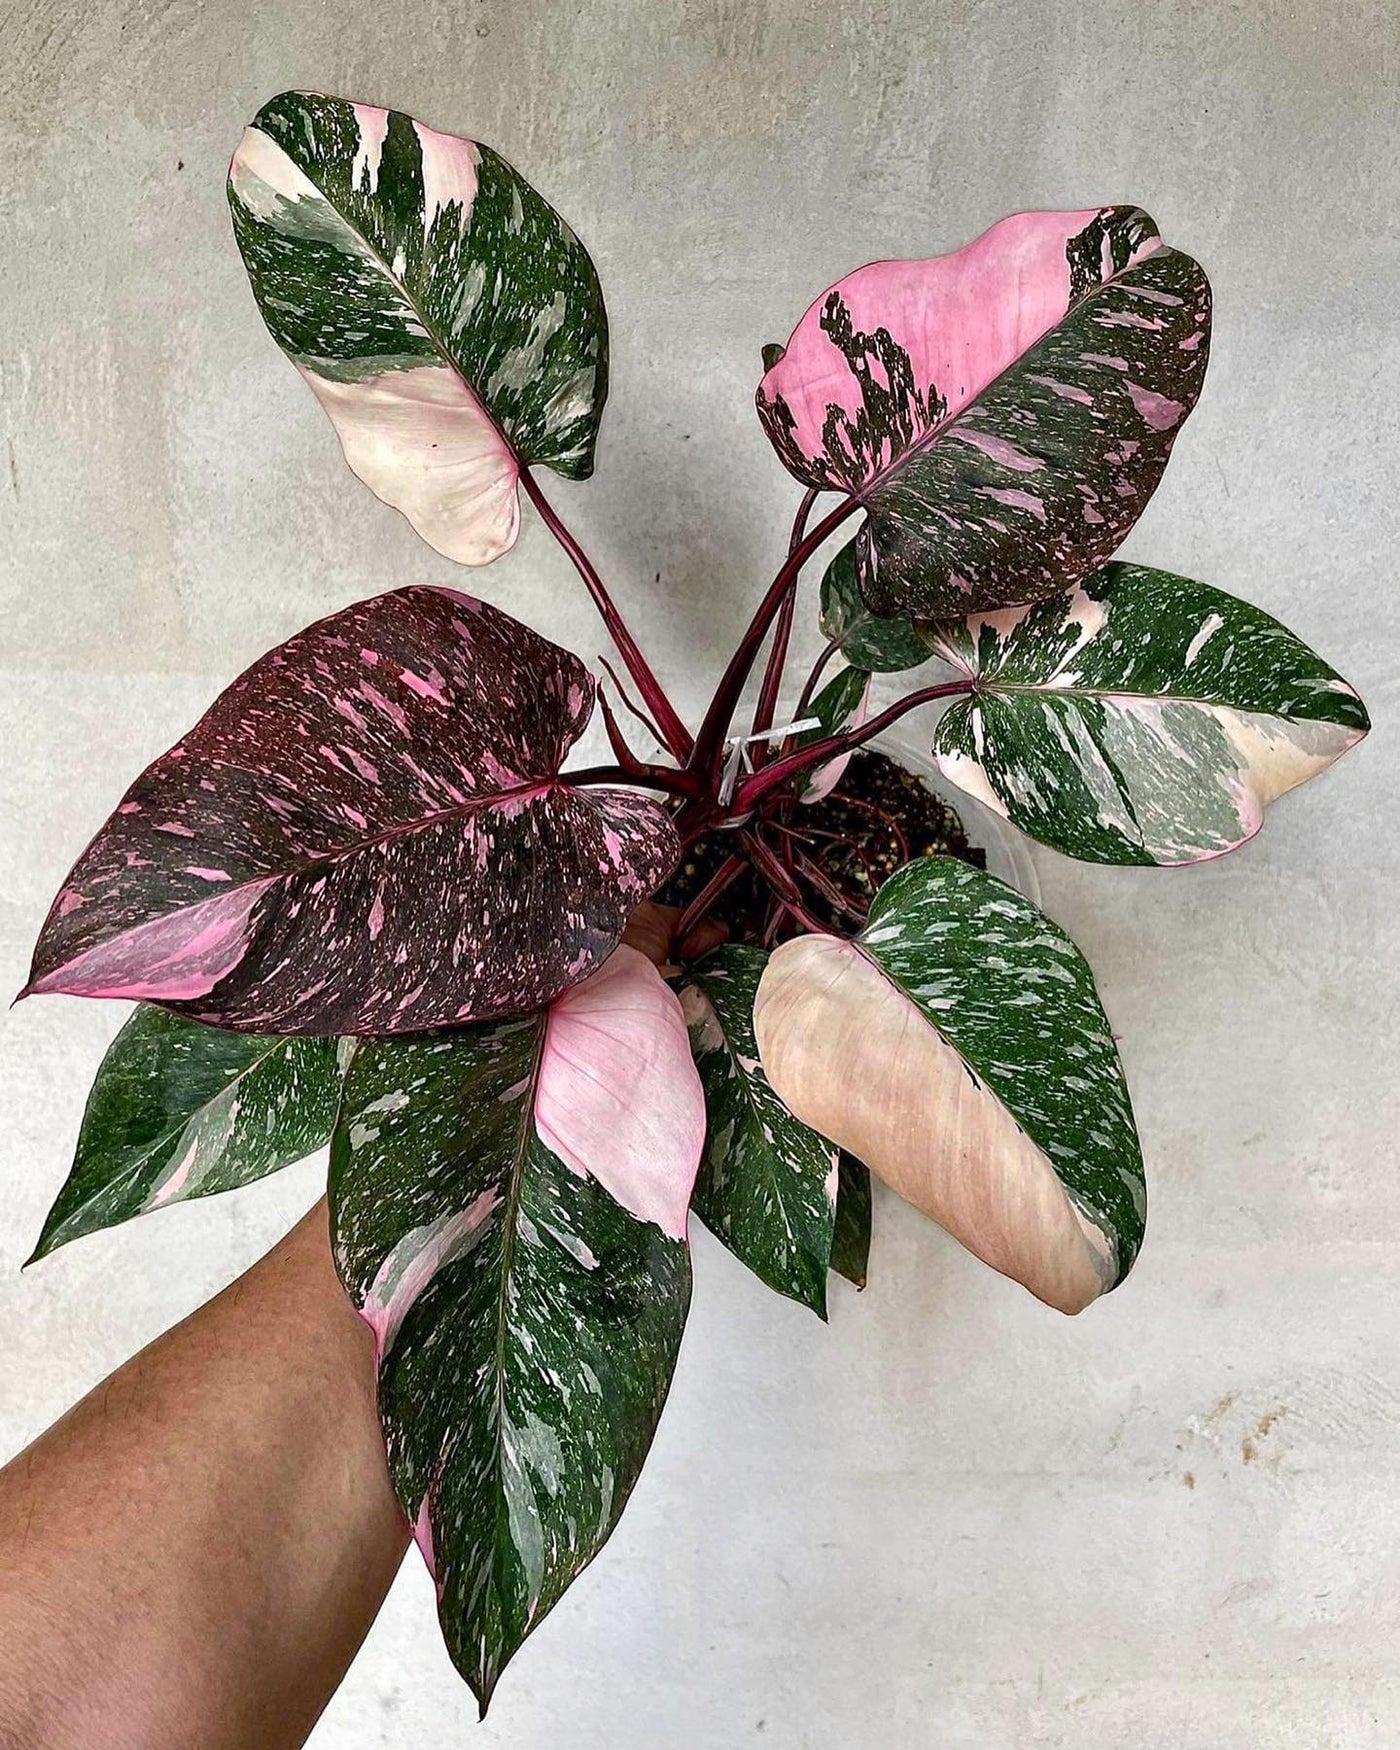 Philodendron Pink Princess Marble Galaxy for sale near me - San Diego, California - Plant Vault